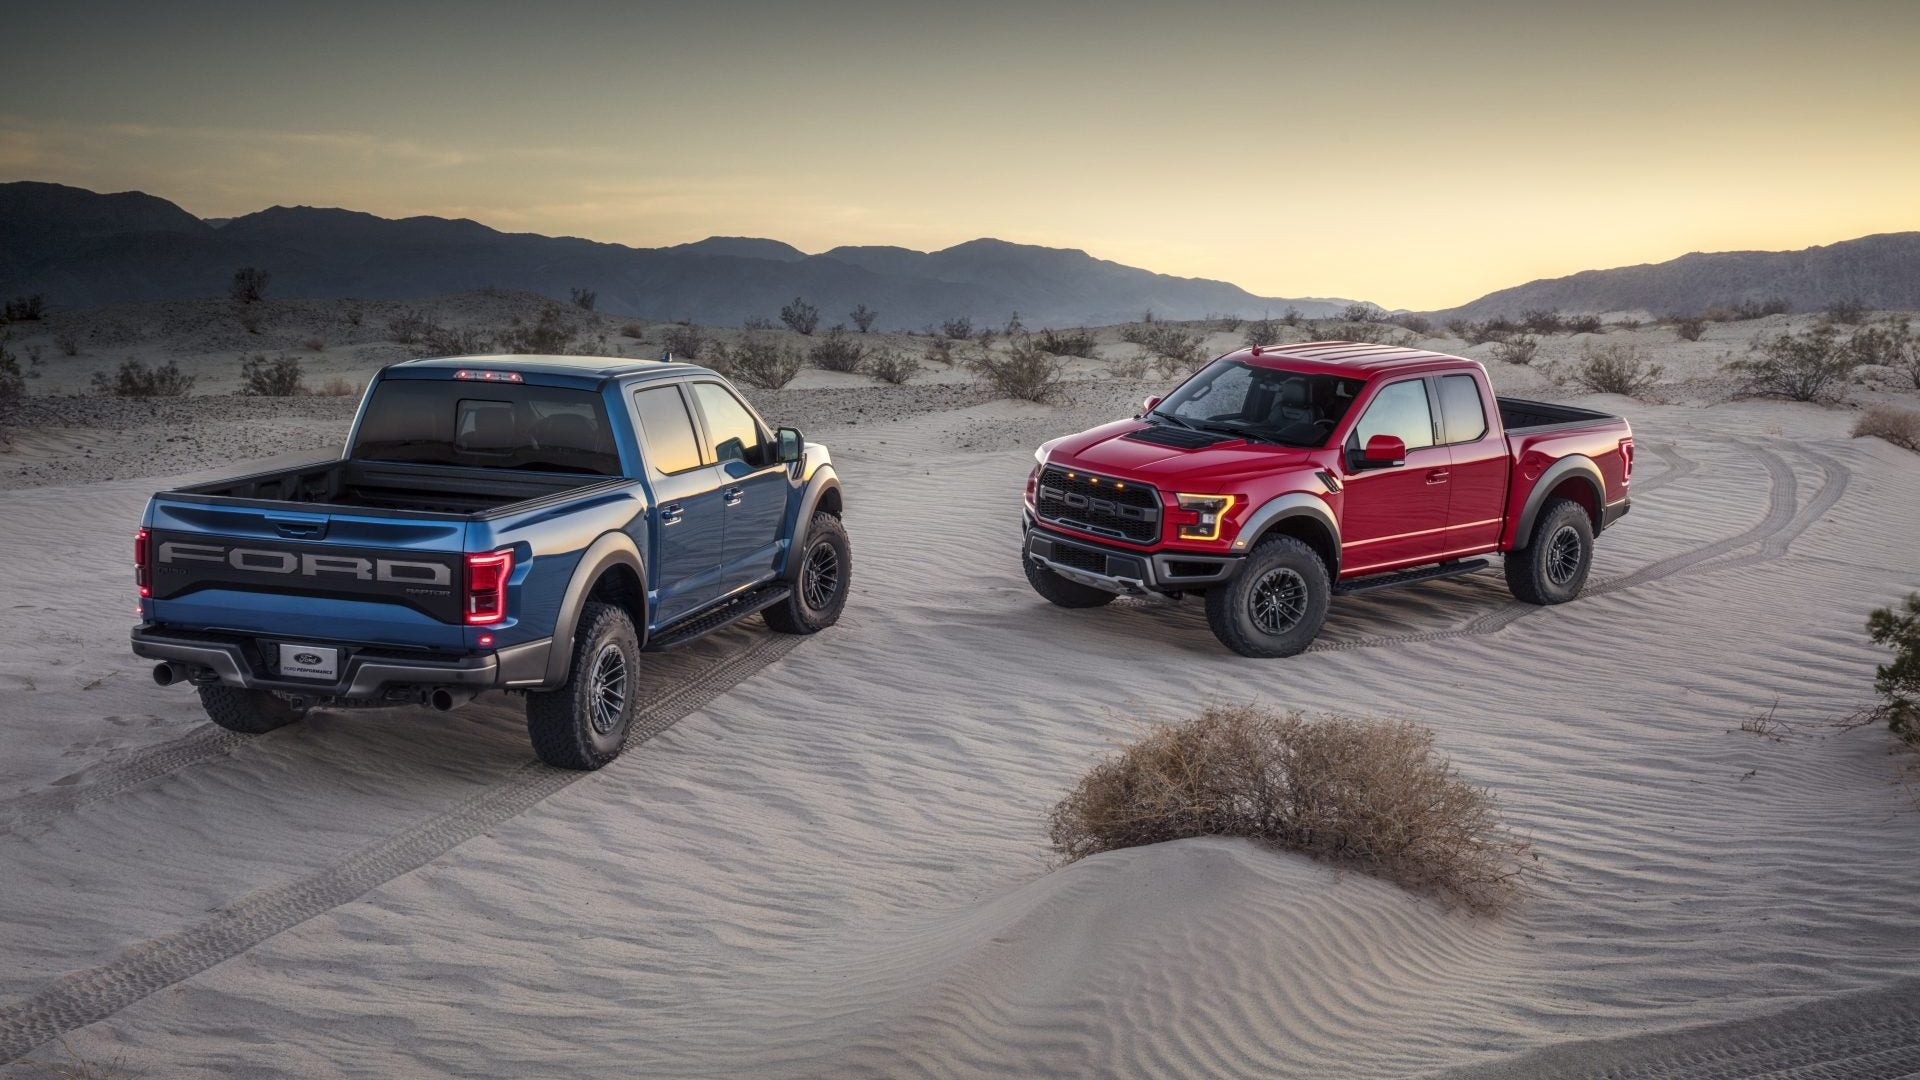 2019 Ford F-150 Raptor: It’ll Make a Rough Rider out of You